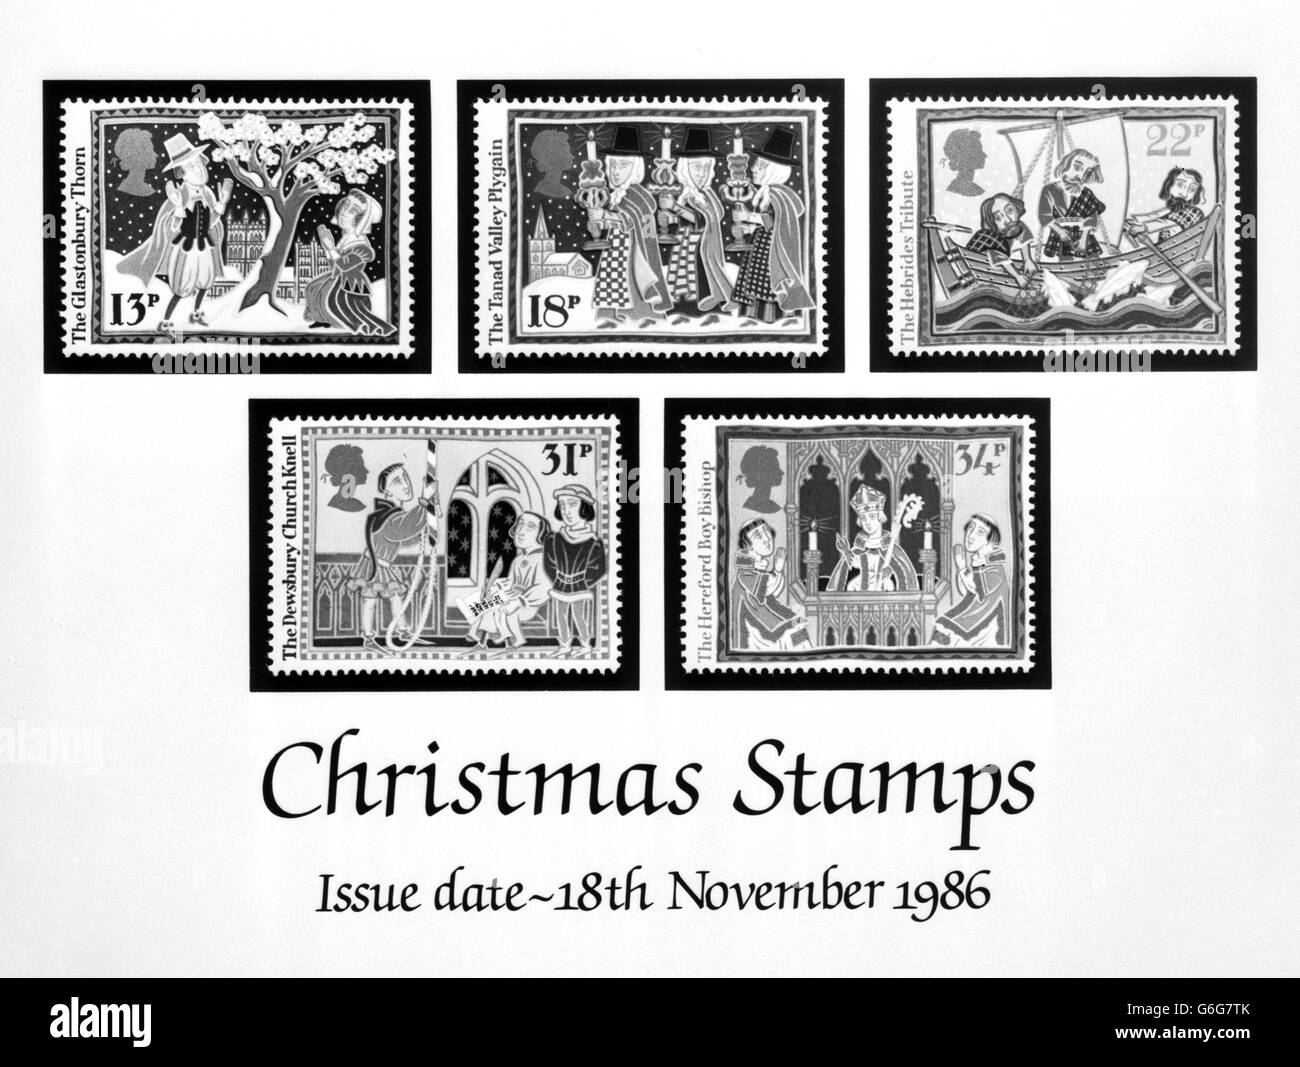 Royal Mail Post Office Christmas Stamps Stock Photo Alamy